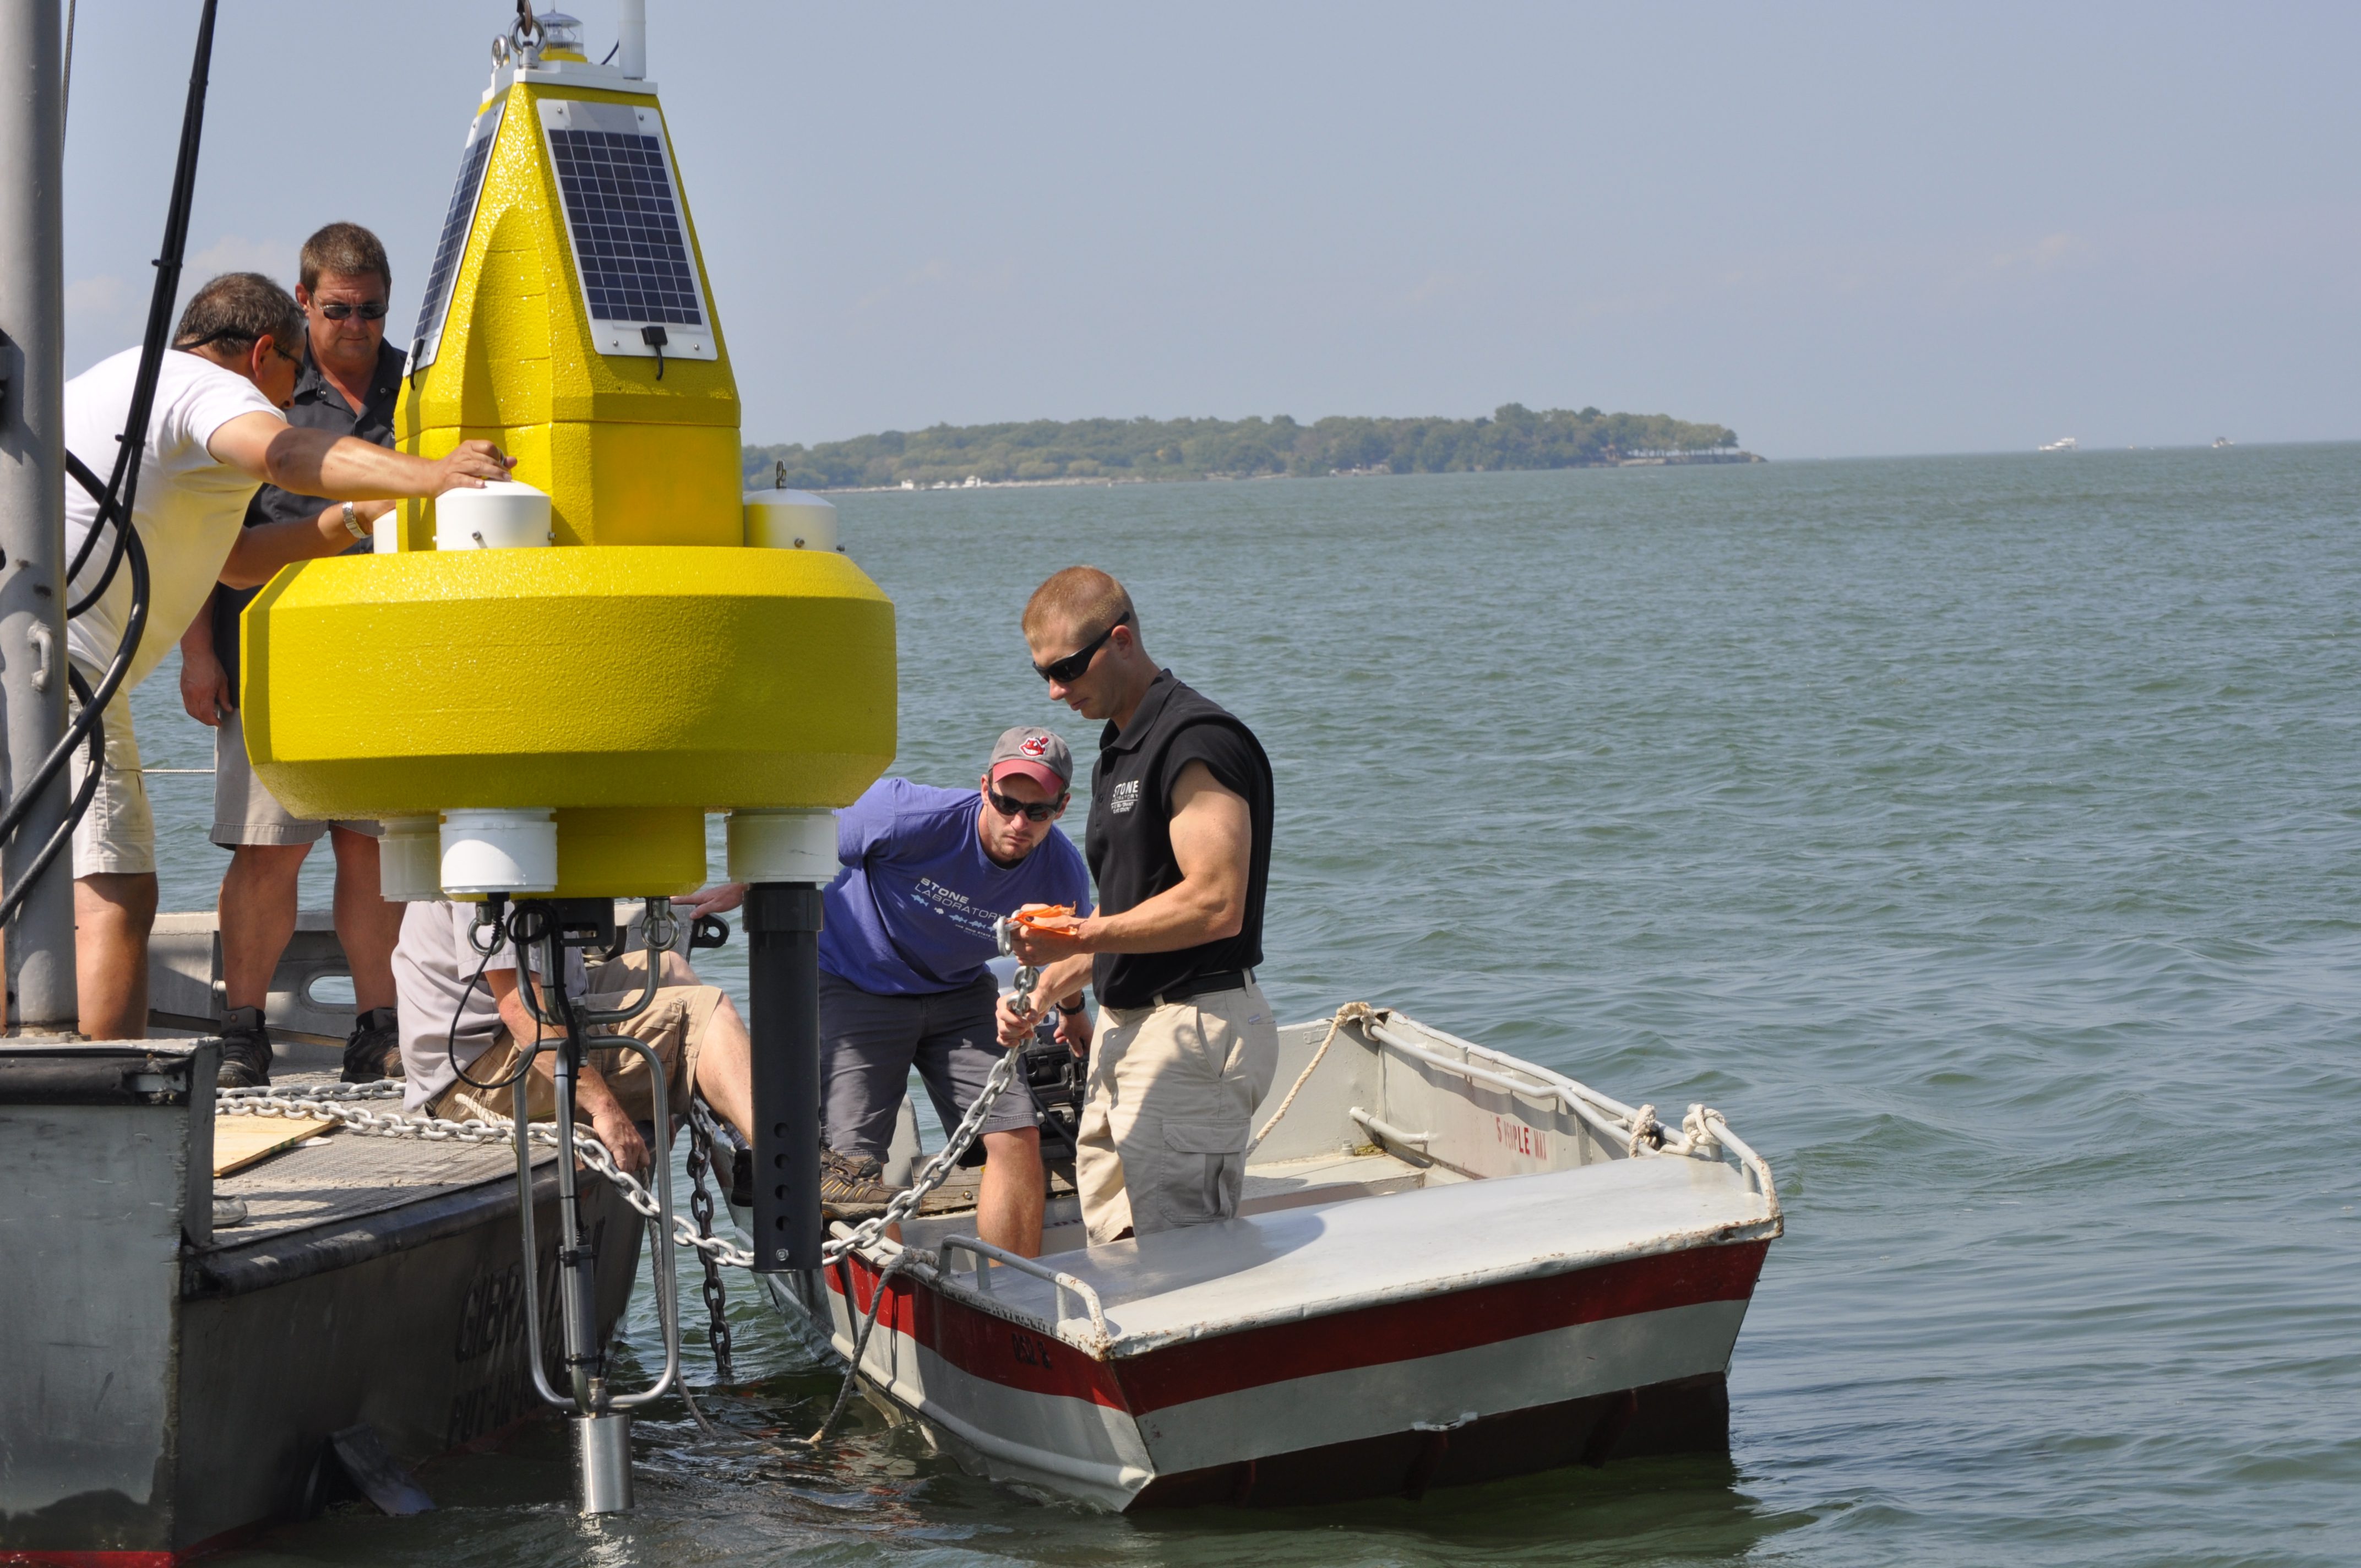 science buoy deployed to research water quality on Lake Erie